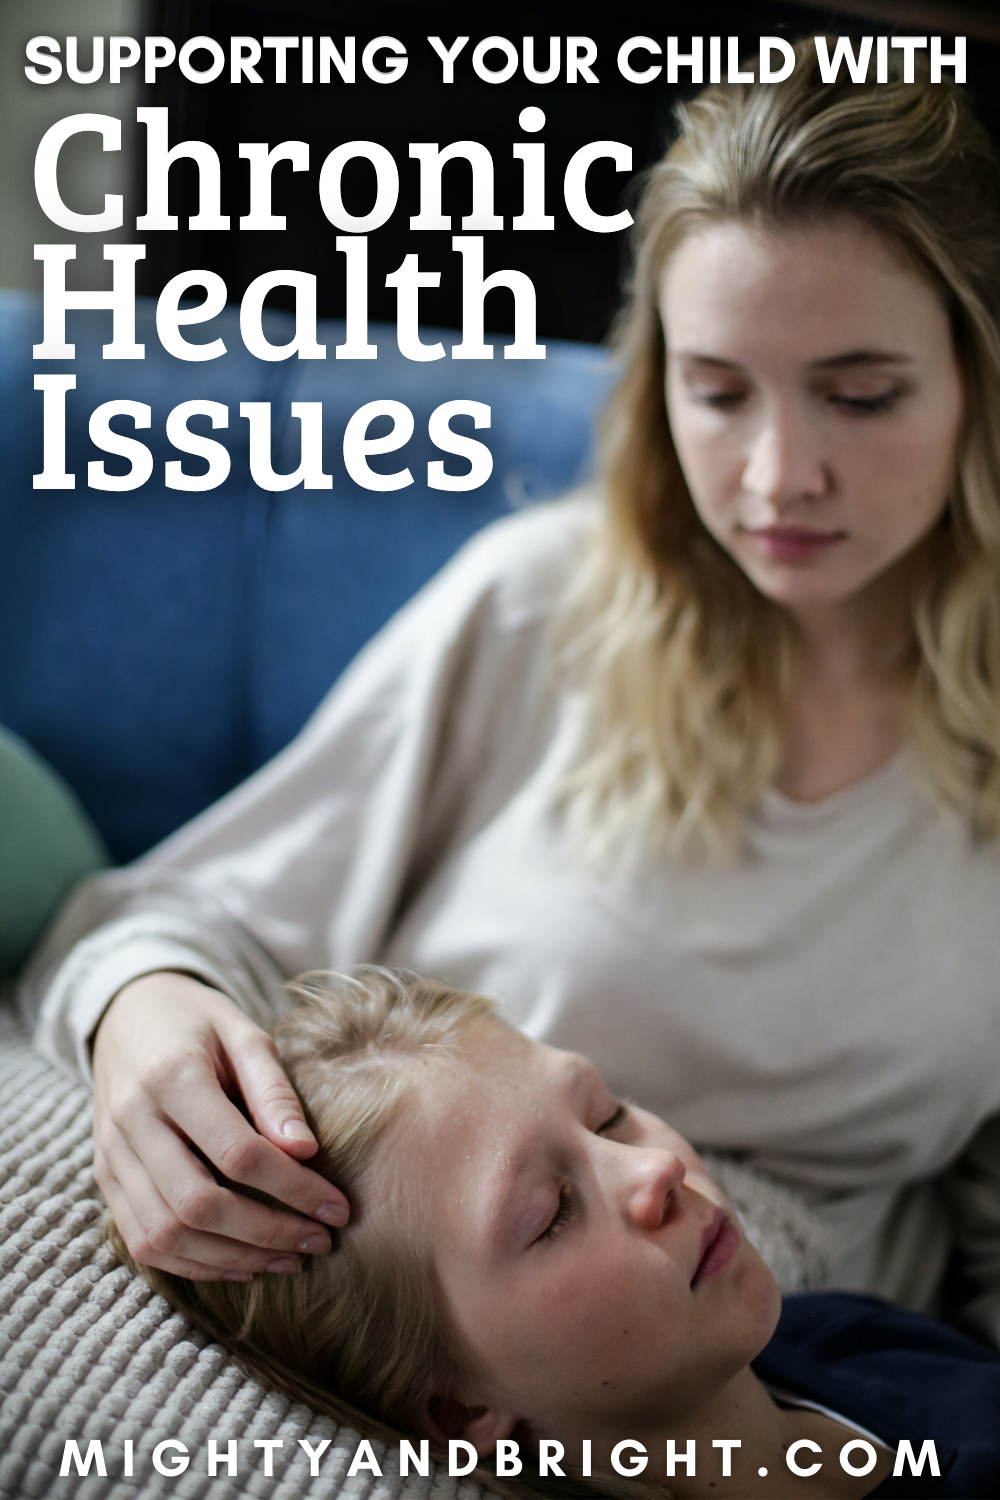 How to Help a Child Cope With Chronic Health Issues